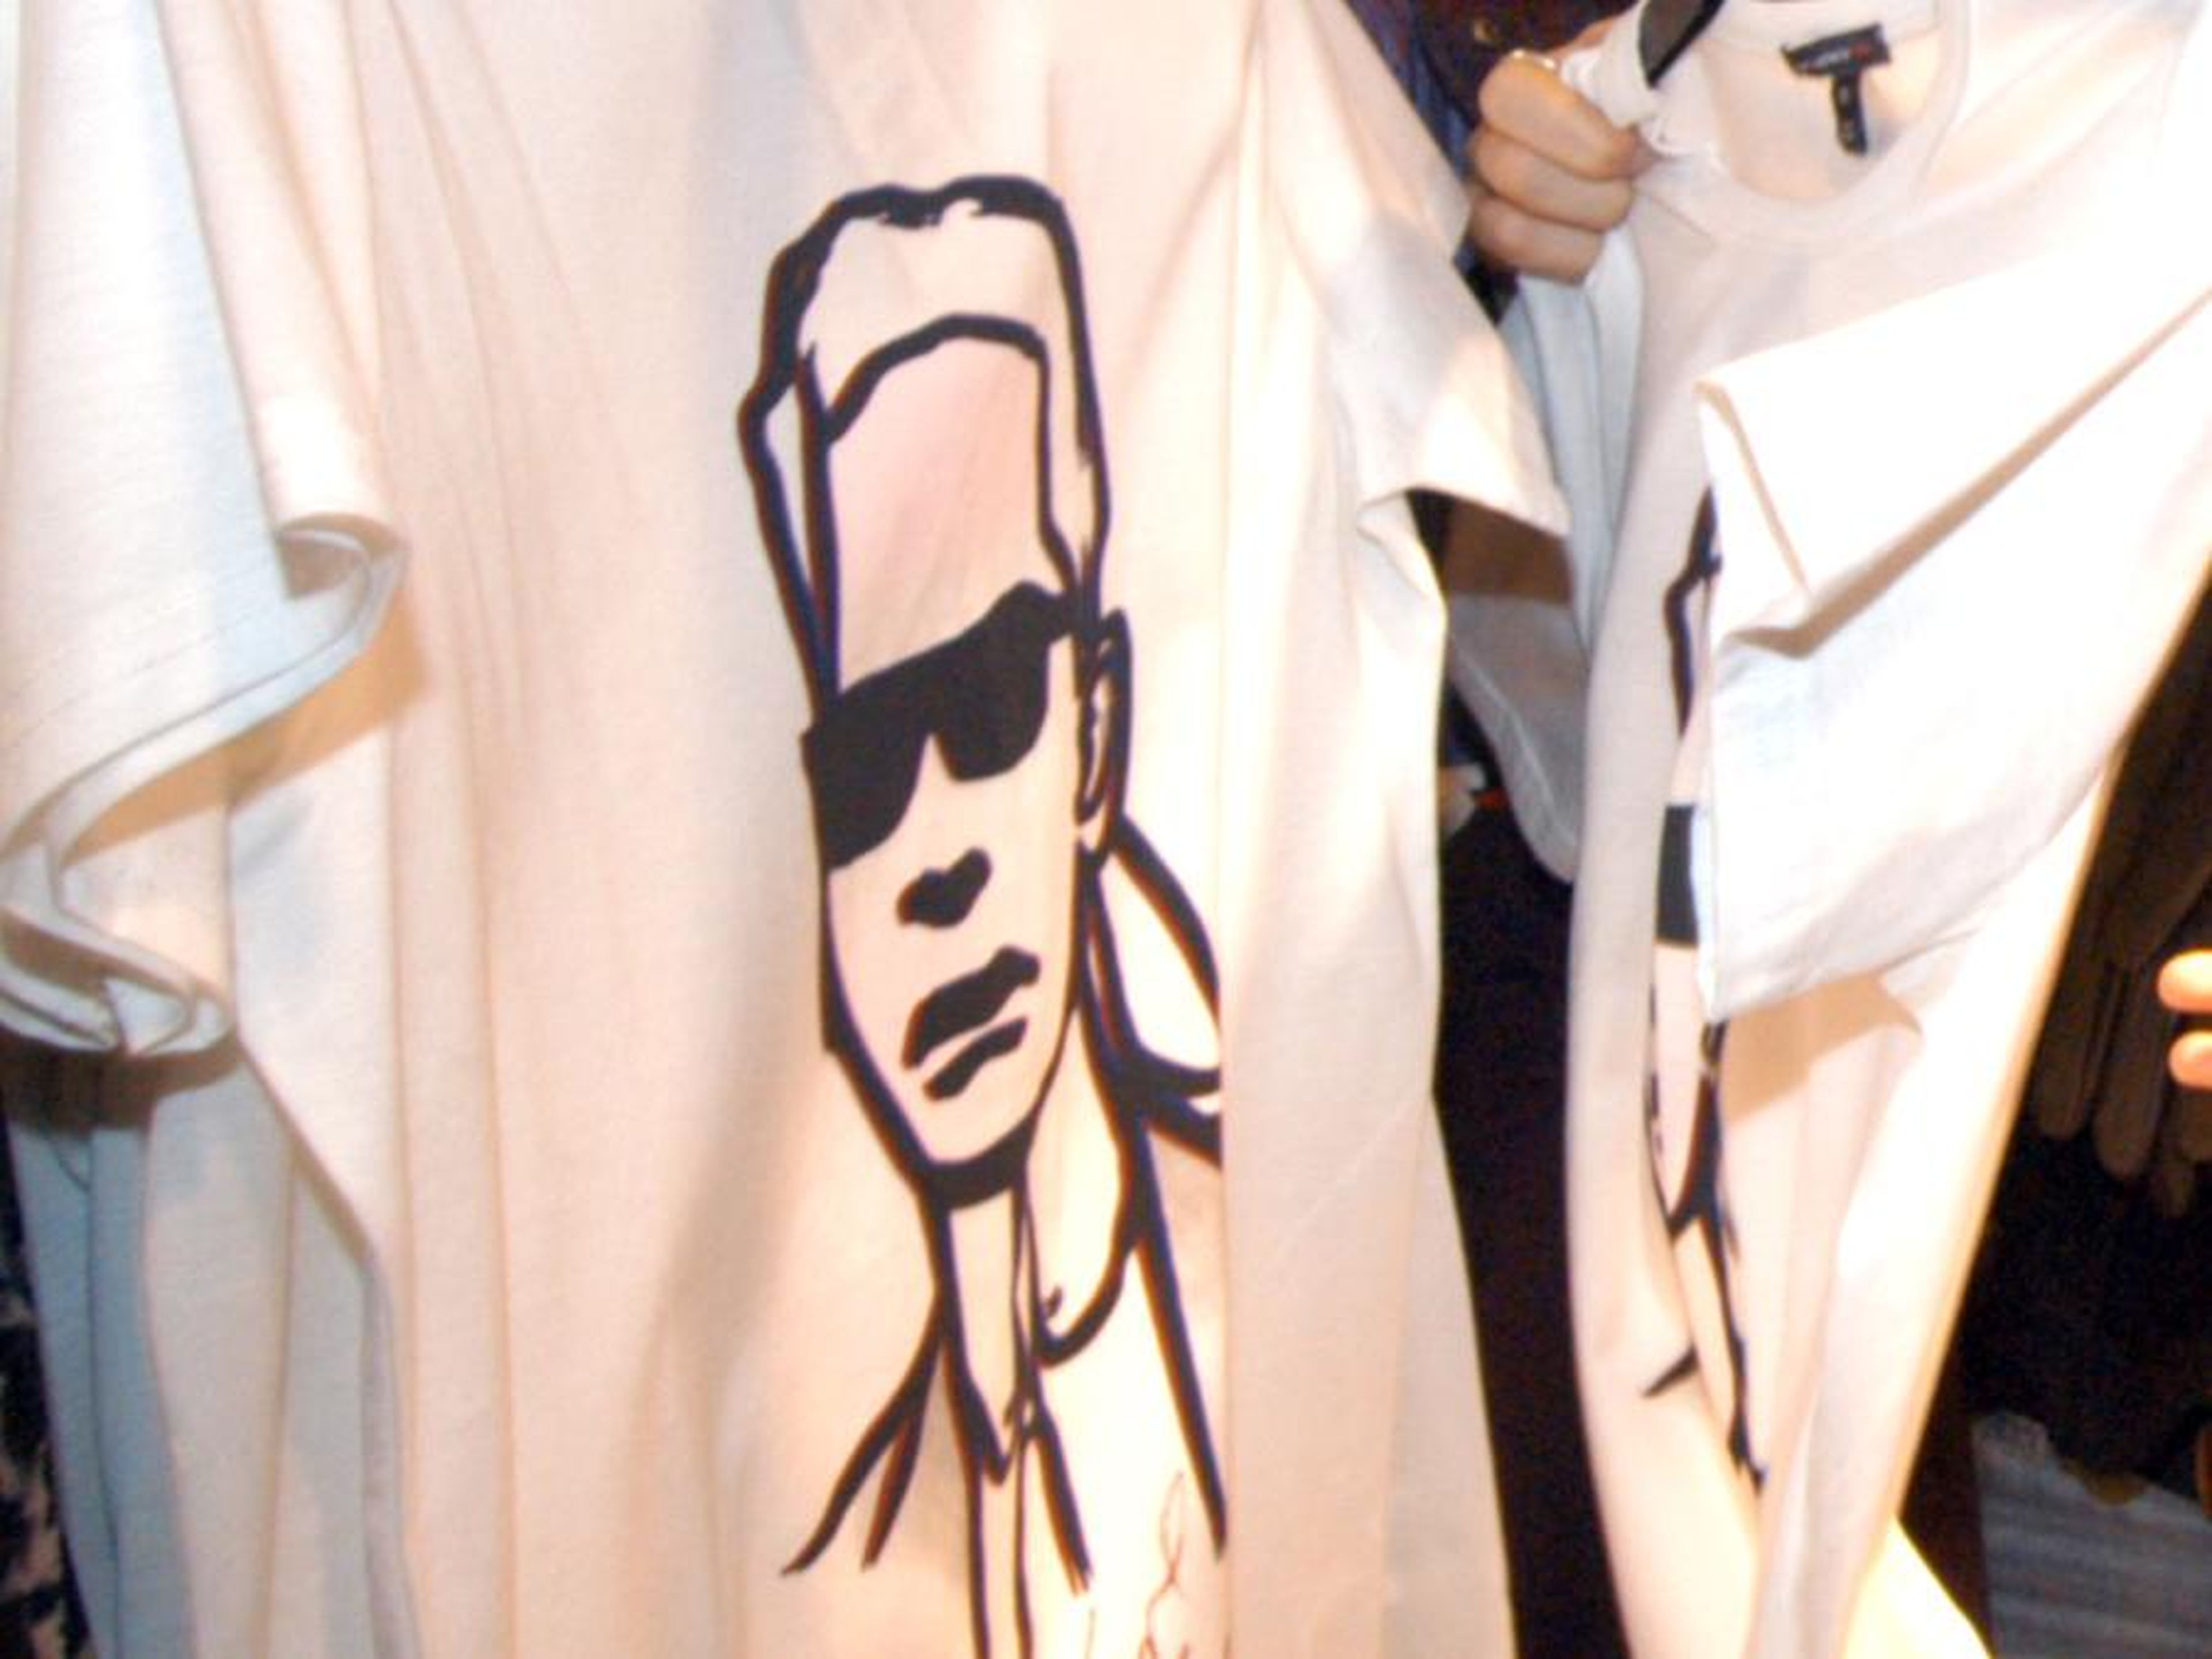 The collection included T-shirts with Lagerfeld' face on them.